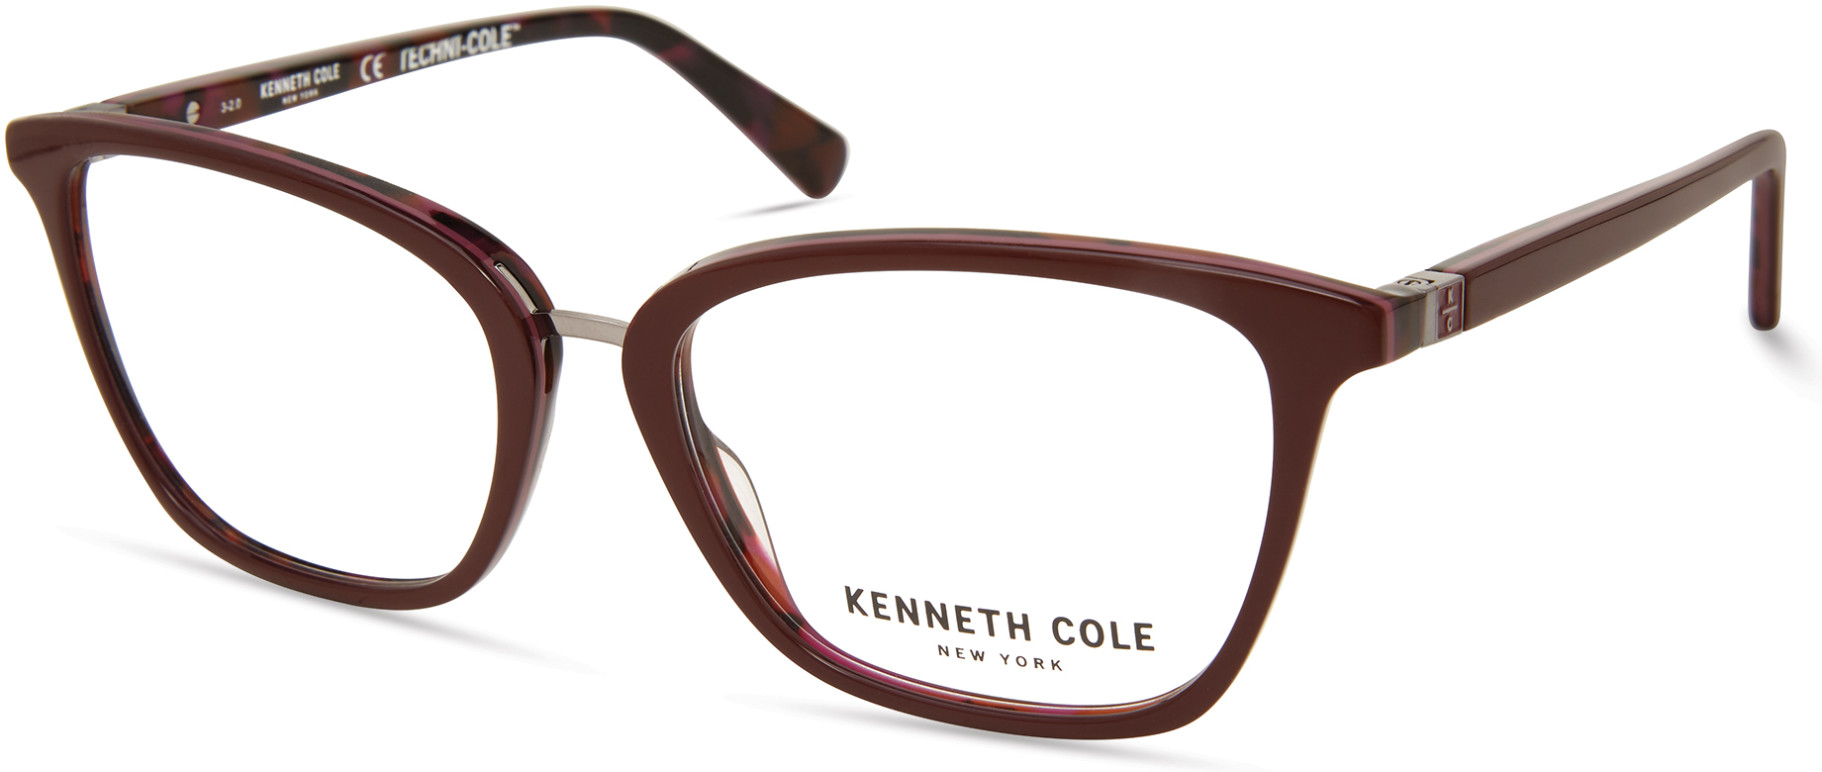 KENNETH COLE NY 0328 077